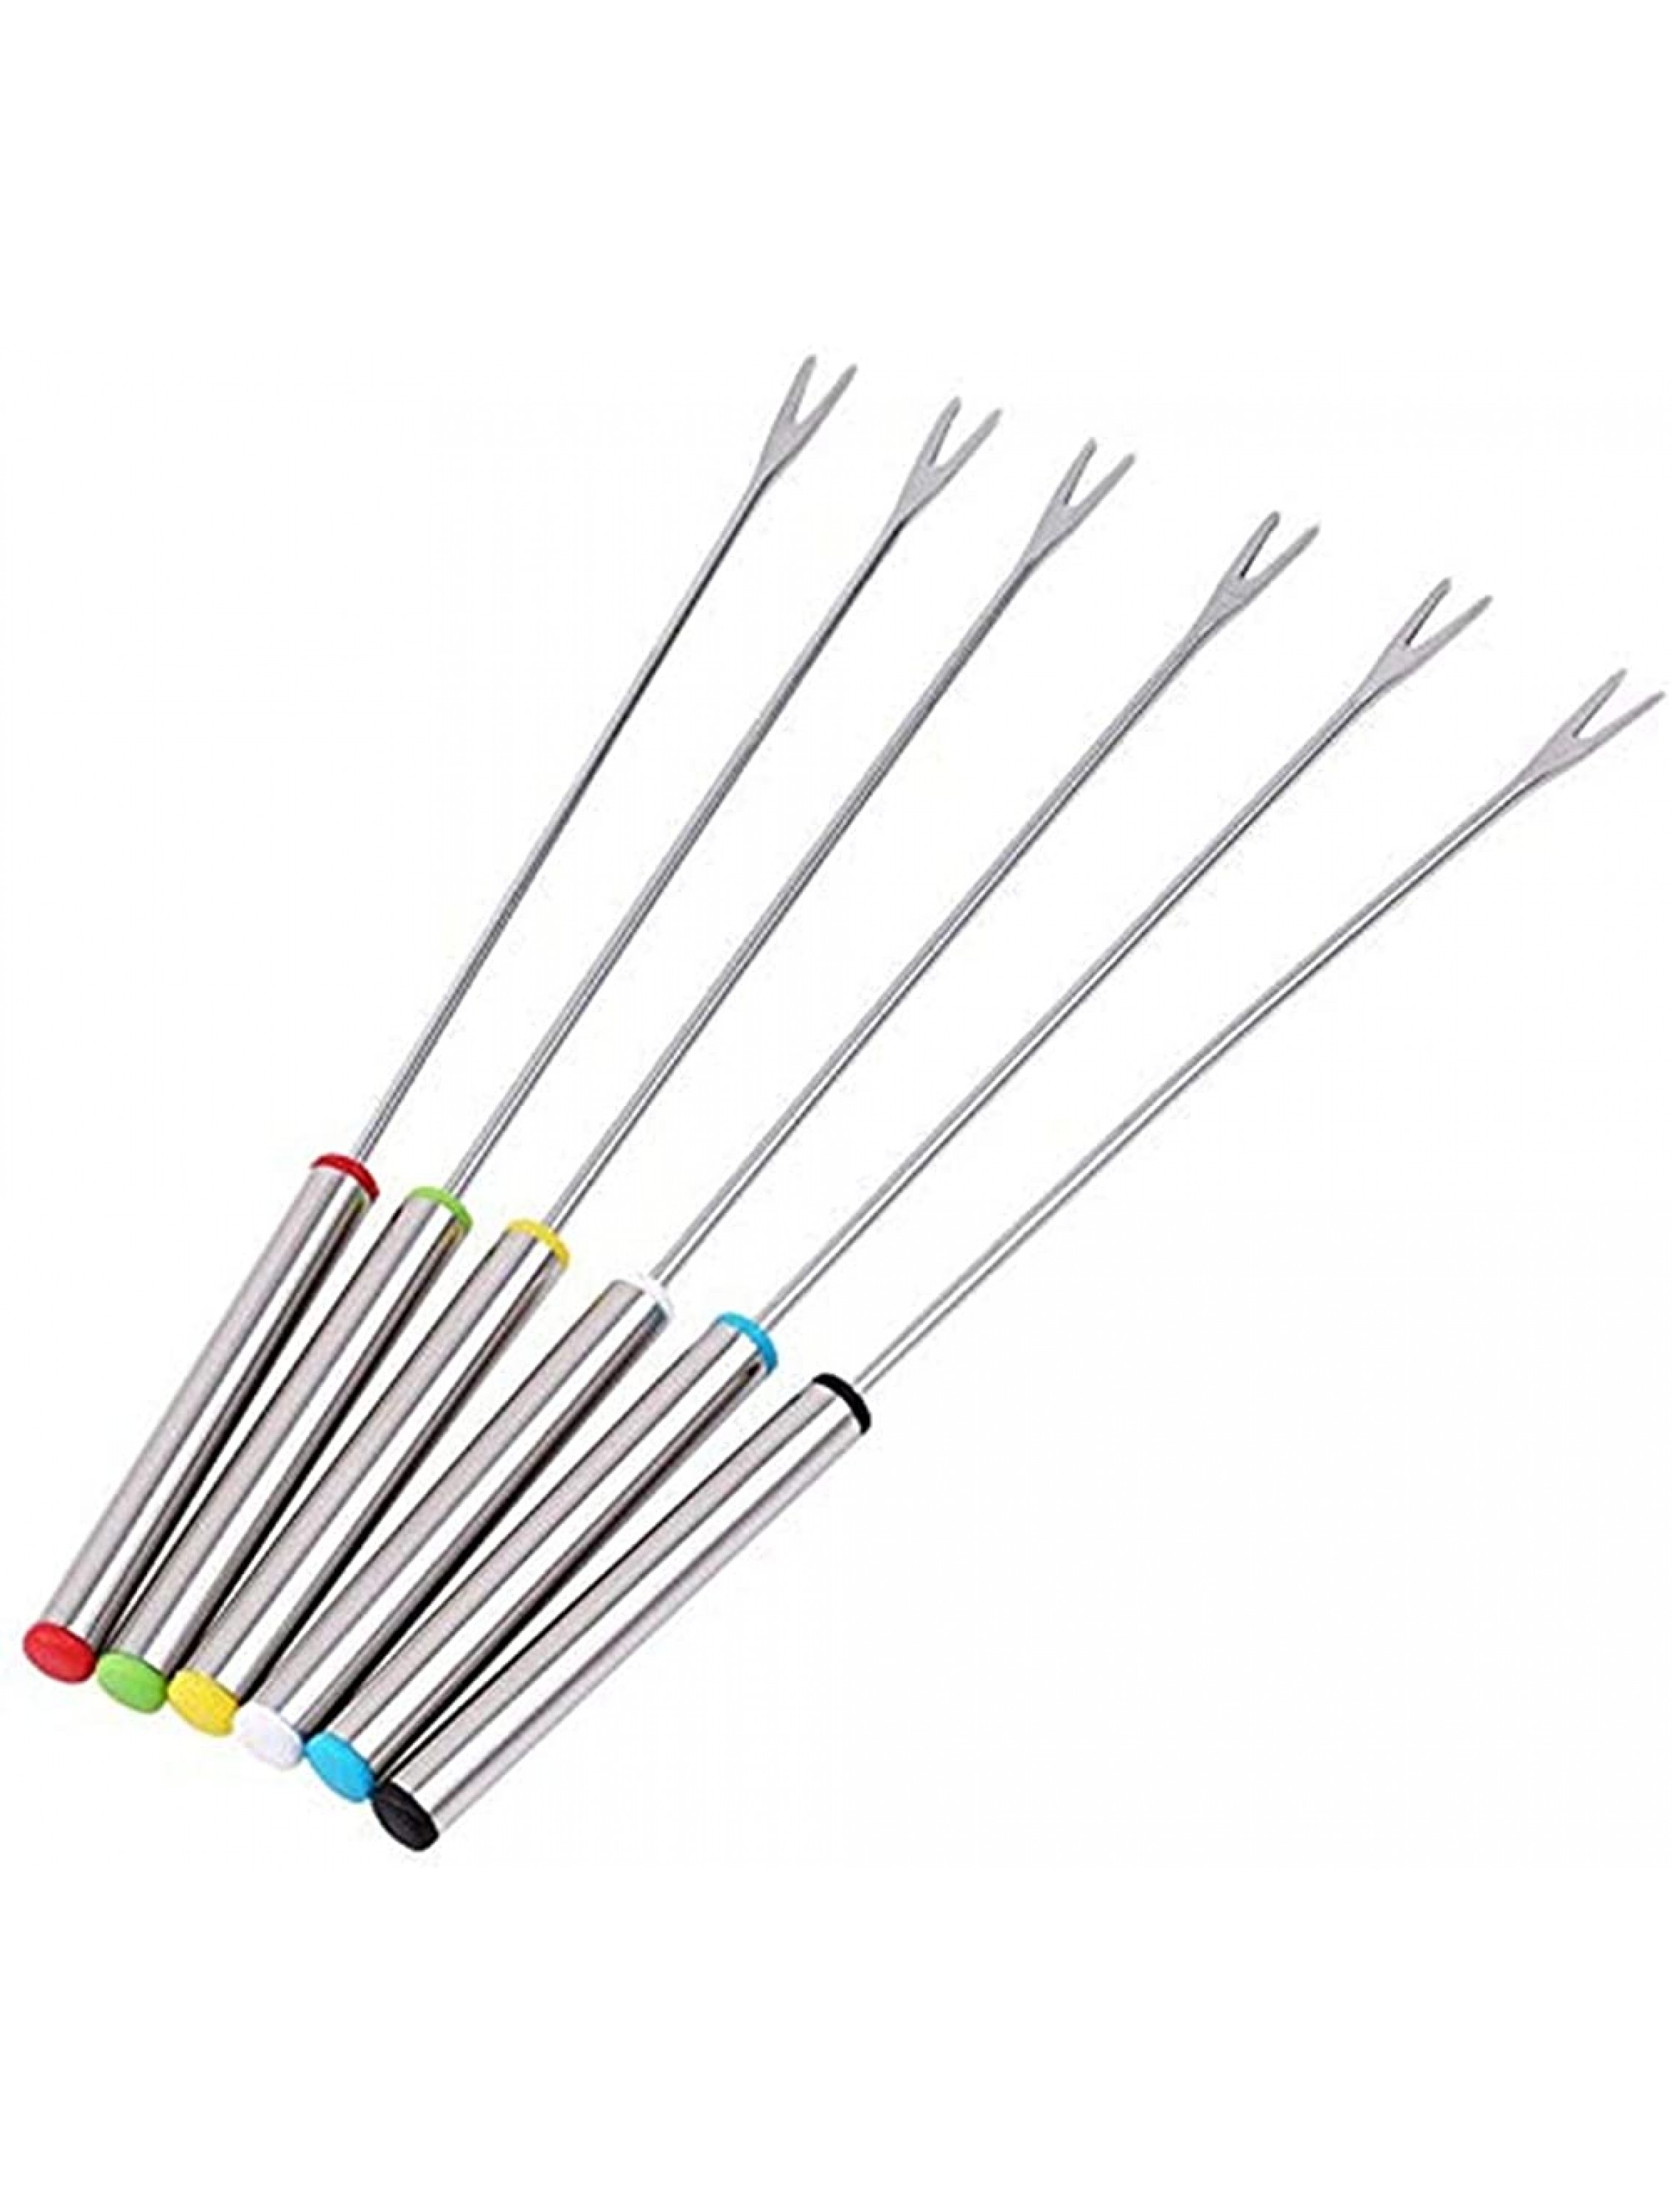 6 Pack Color Coding Cheese Fondue Forks Stainless Steel Fruit Fondue Forks 9.5 Inch - BFPM46ZVO